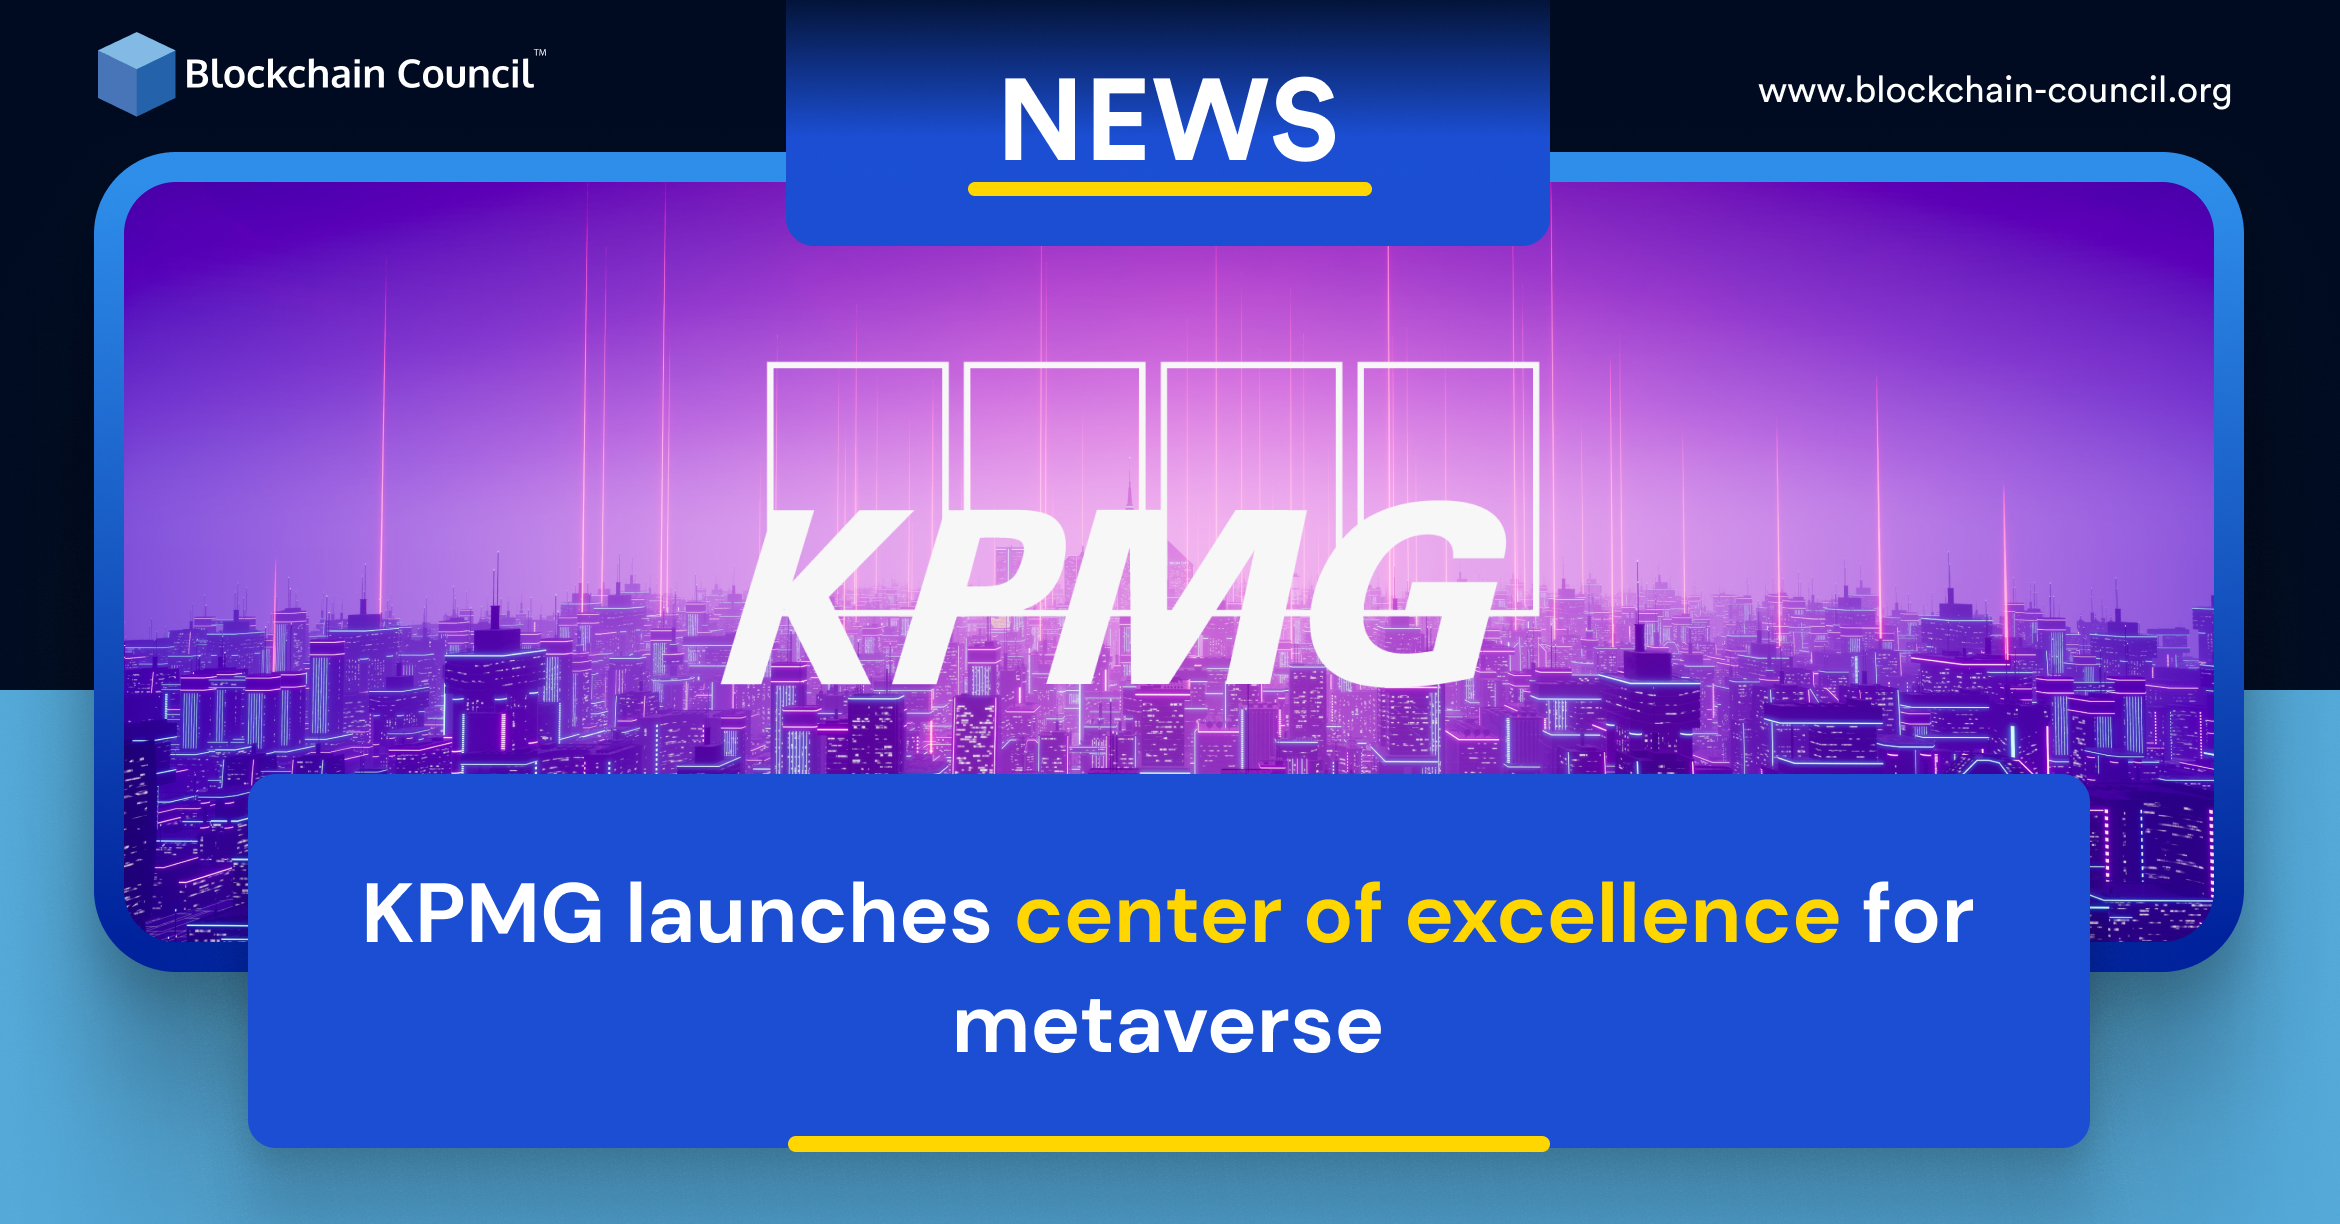 KPMG Launches Center of Excellence for Metaverse